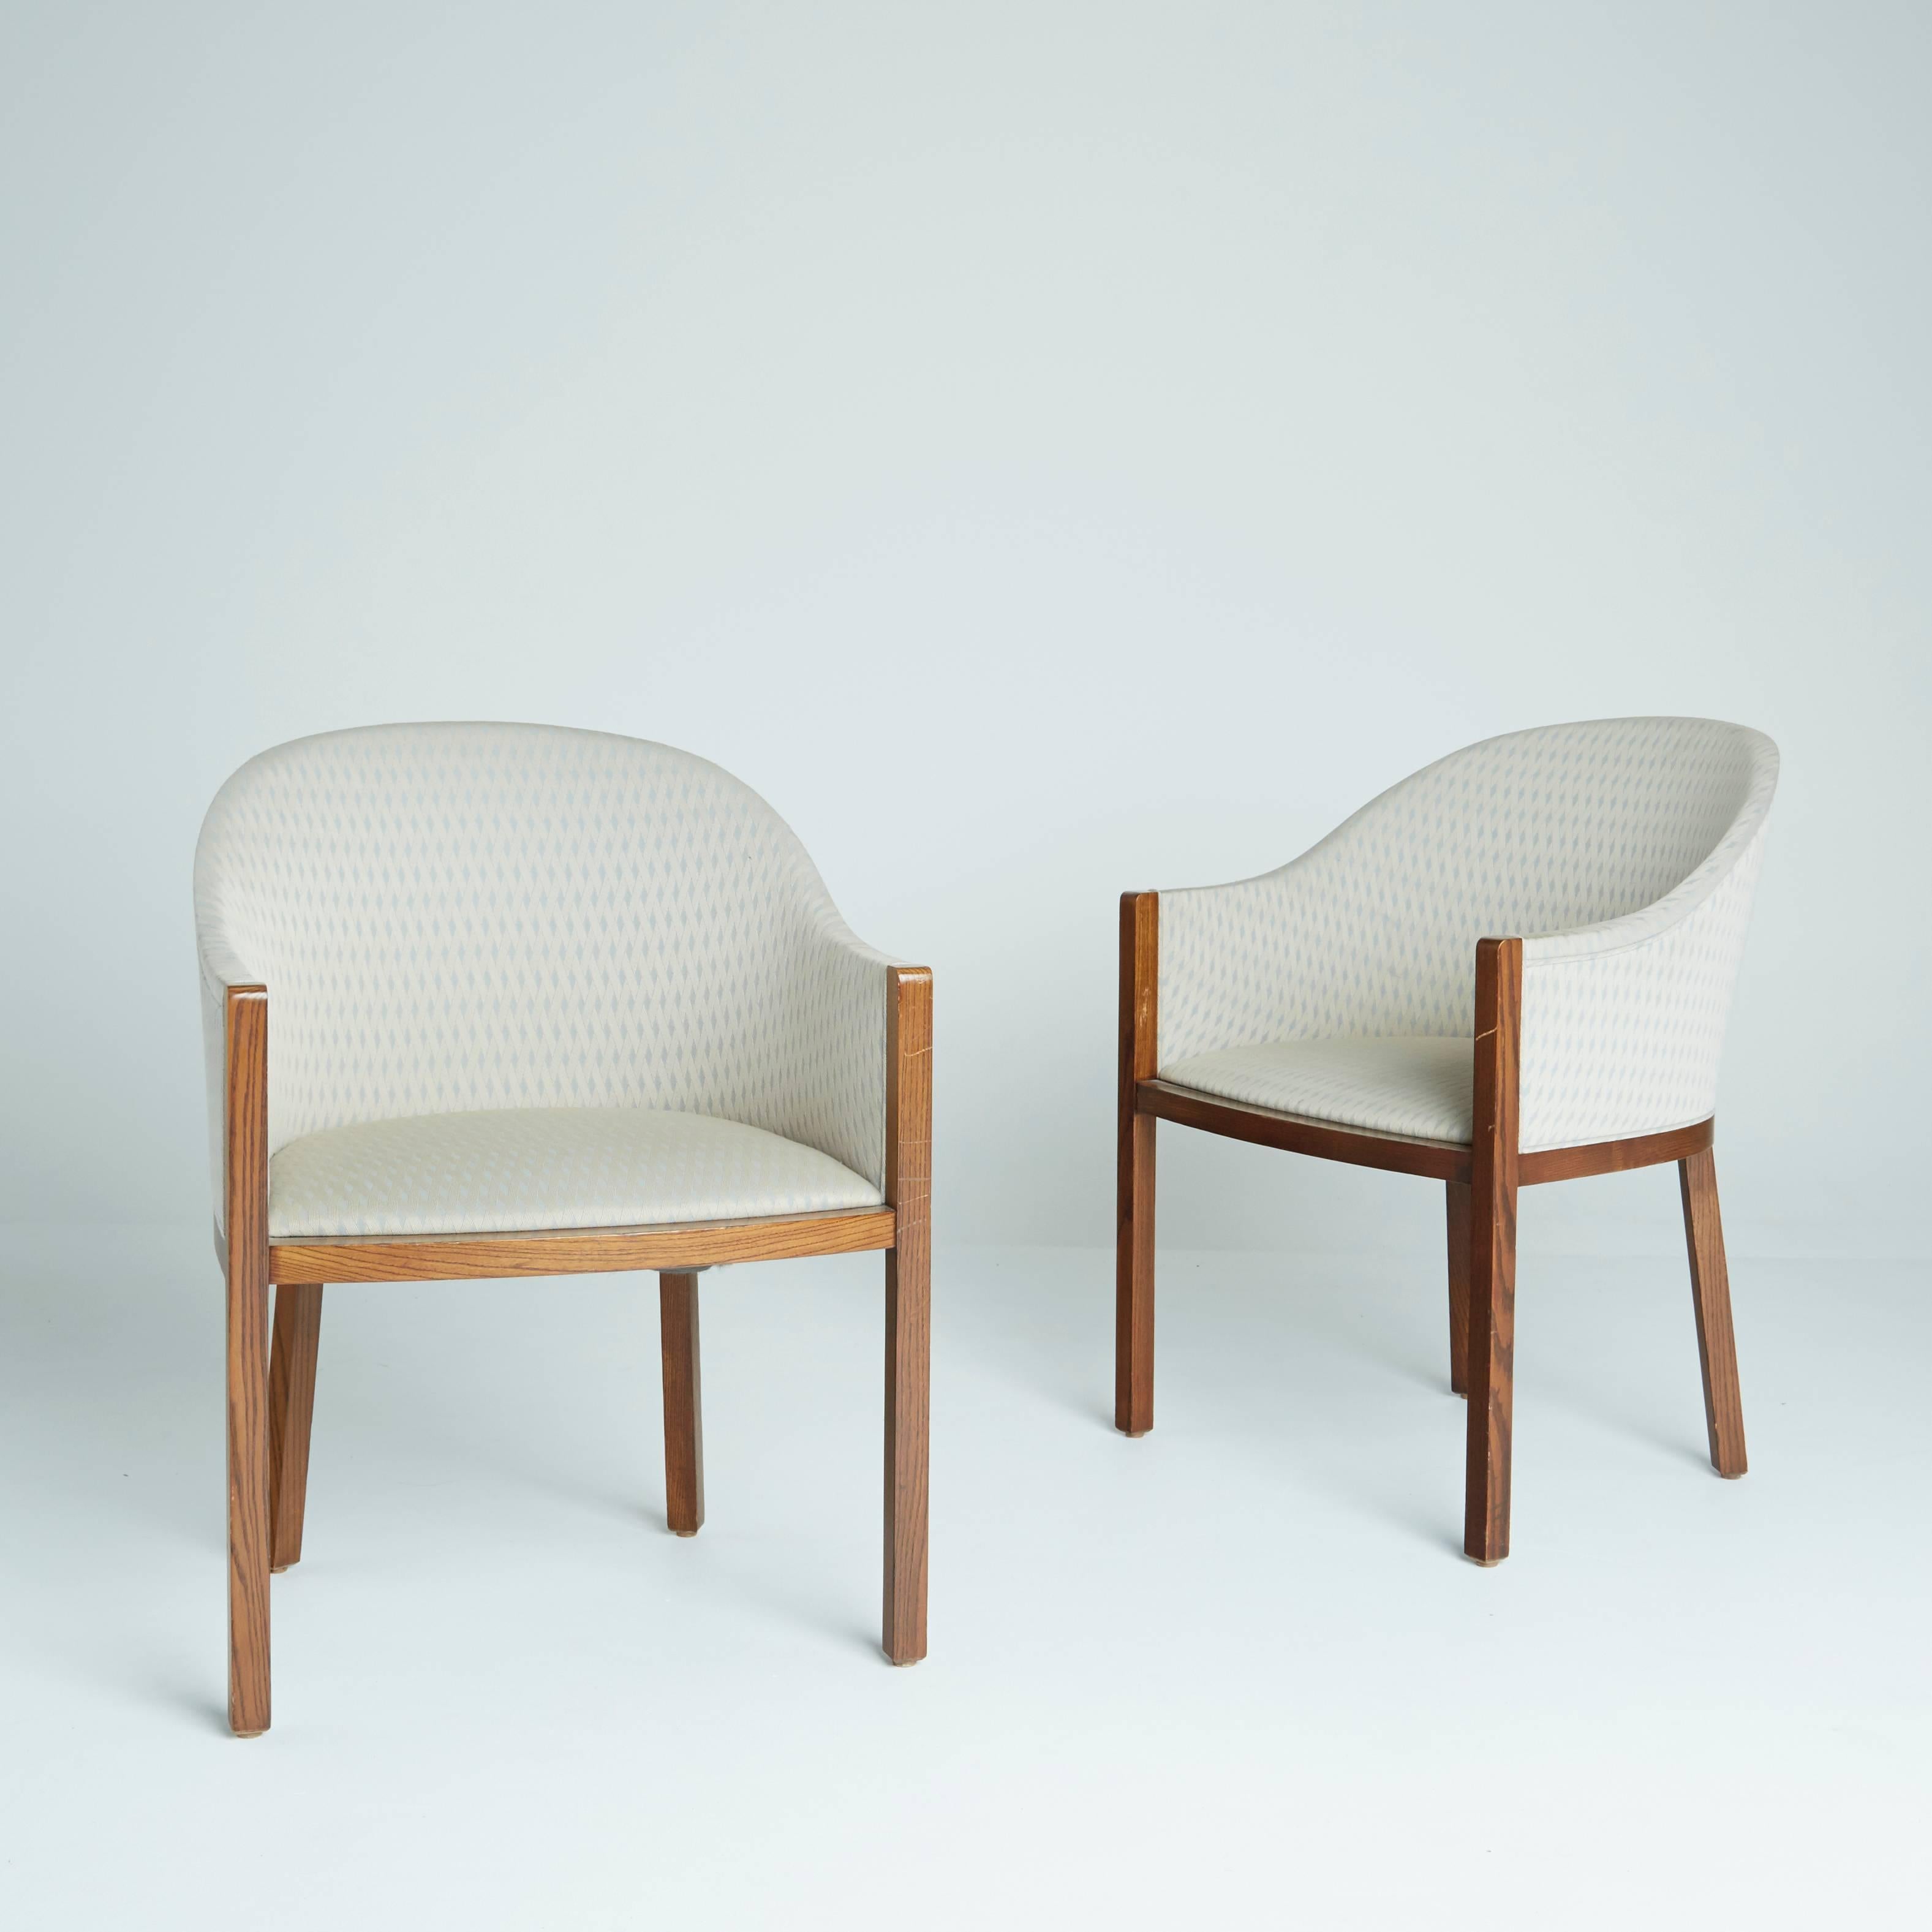 These sculptural lounge chairs by Ward Bennet for Brickel Associates feature Classic curvature from the back rests into the arms. The off-white and light blue upholstery has a delicate pattern and a slight sheen, an elegant contrast to the rich